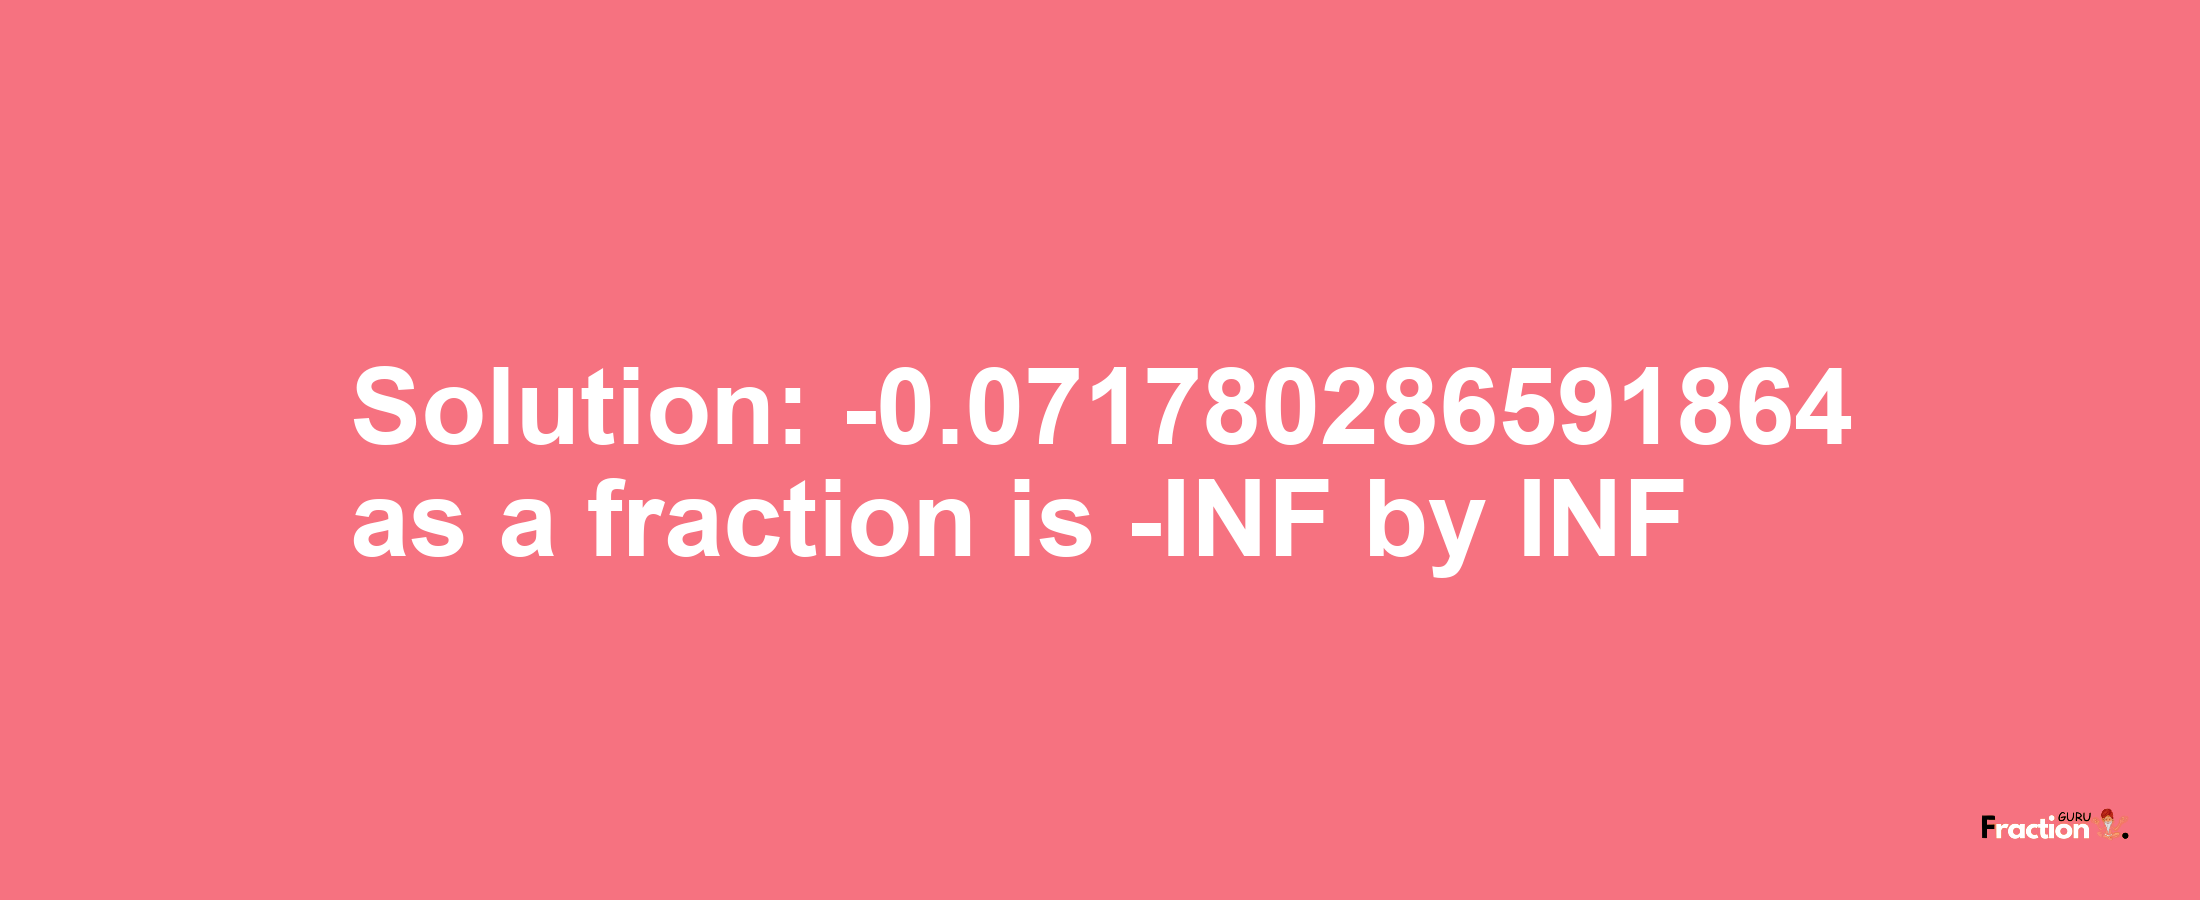 Solution:-0.071780286591864 as a fraction is -INF/INF